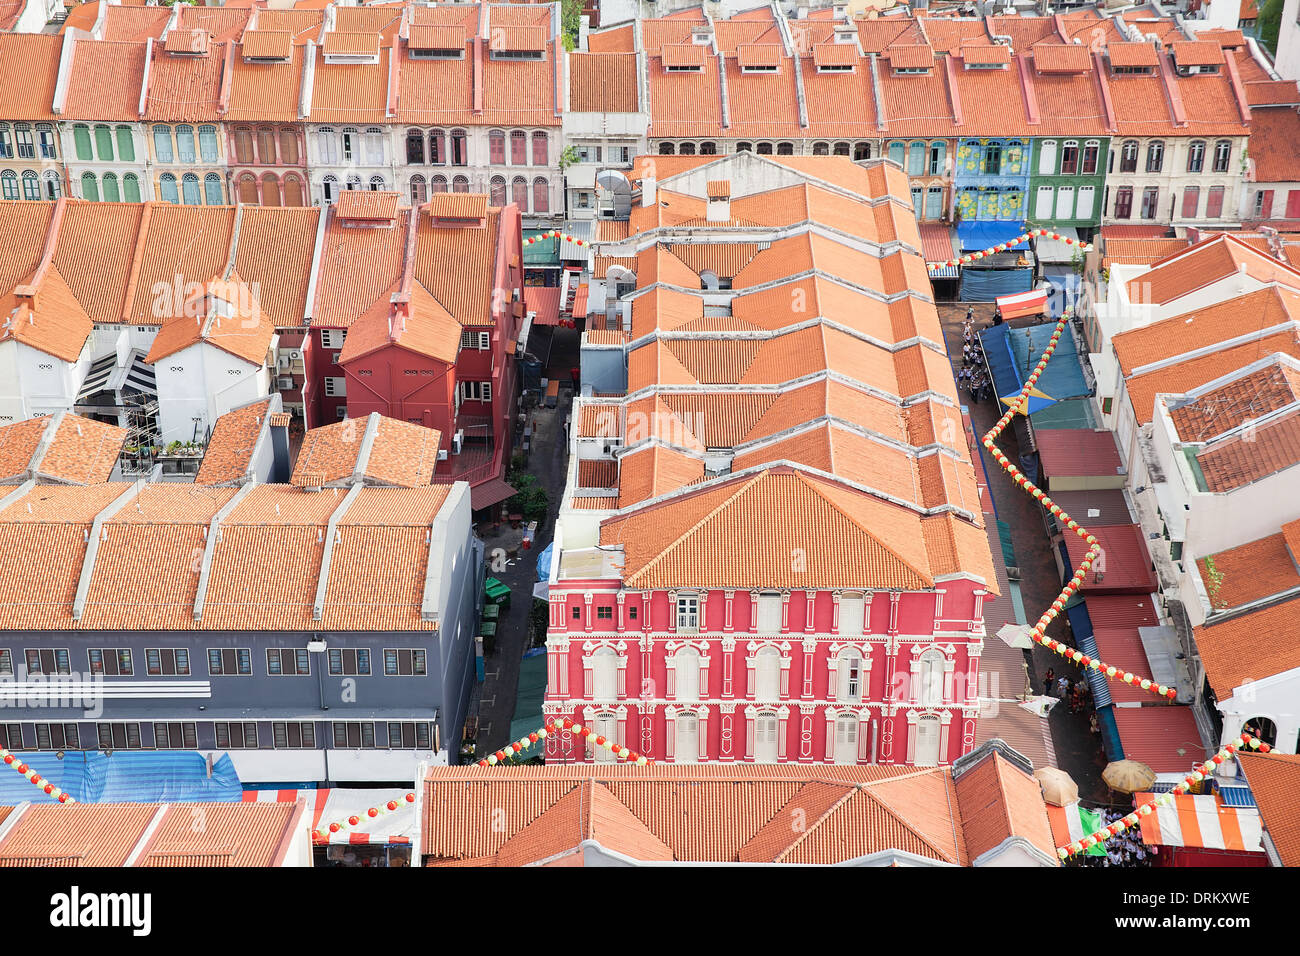 Singapore Chinatown Old Peranakan Shop Houses Aerial View Stock Photo